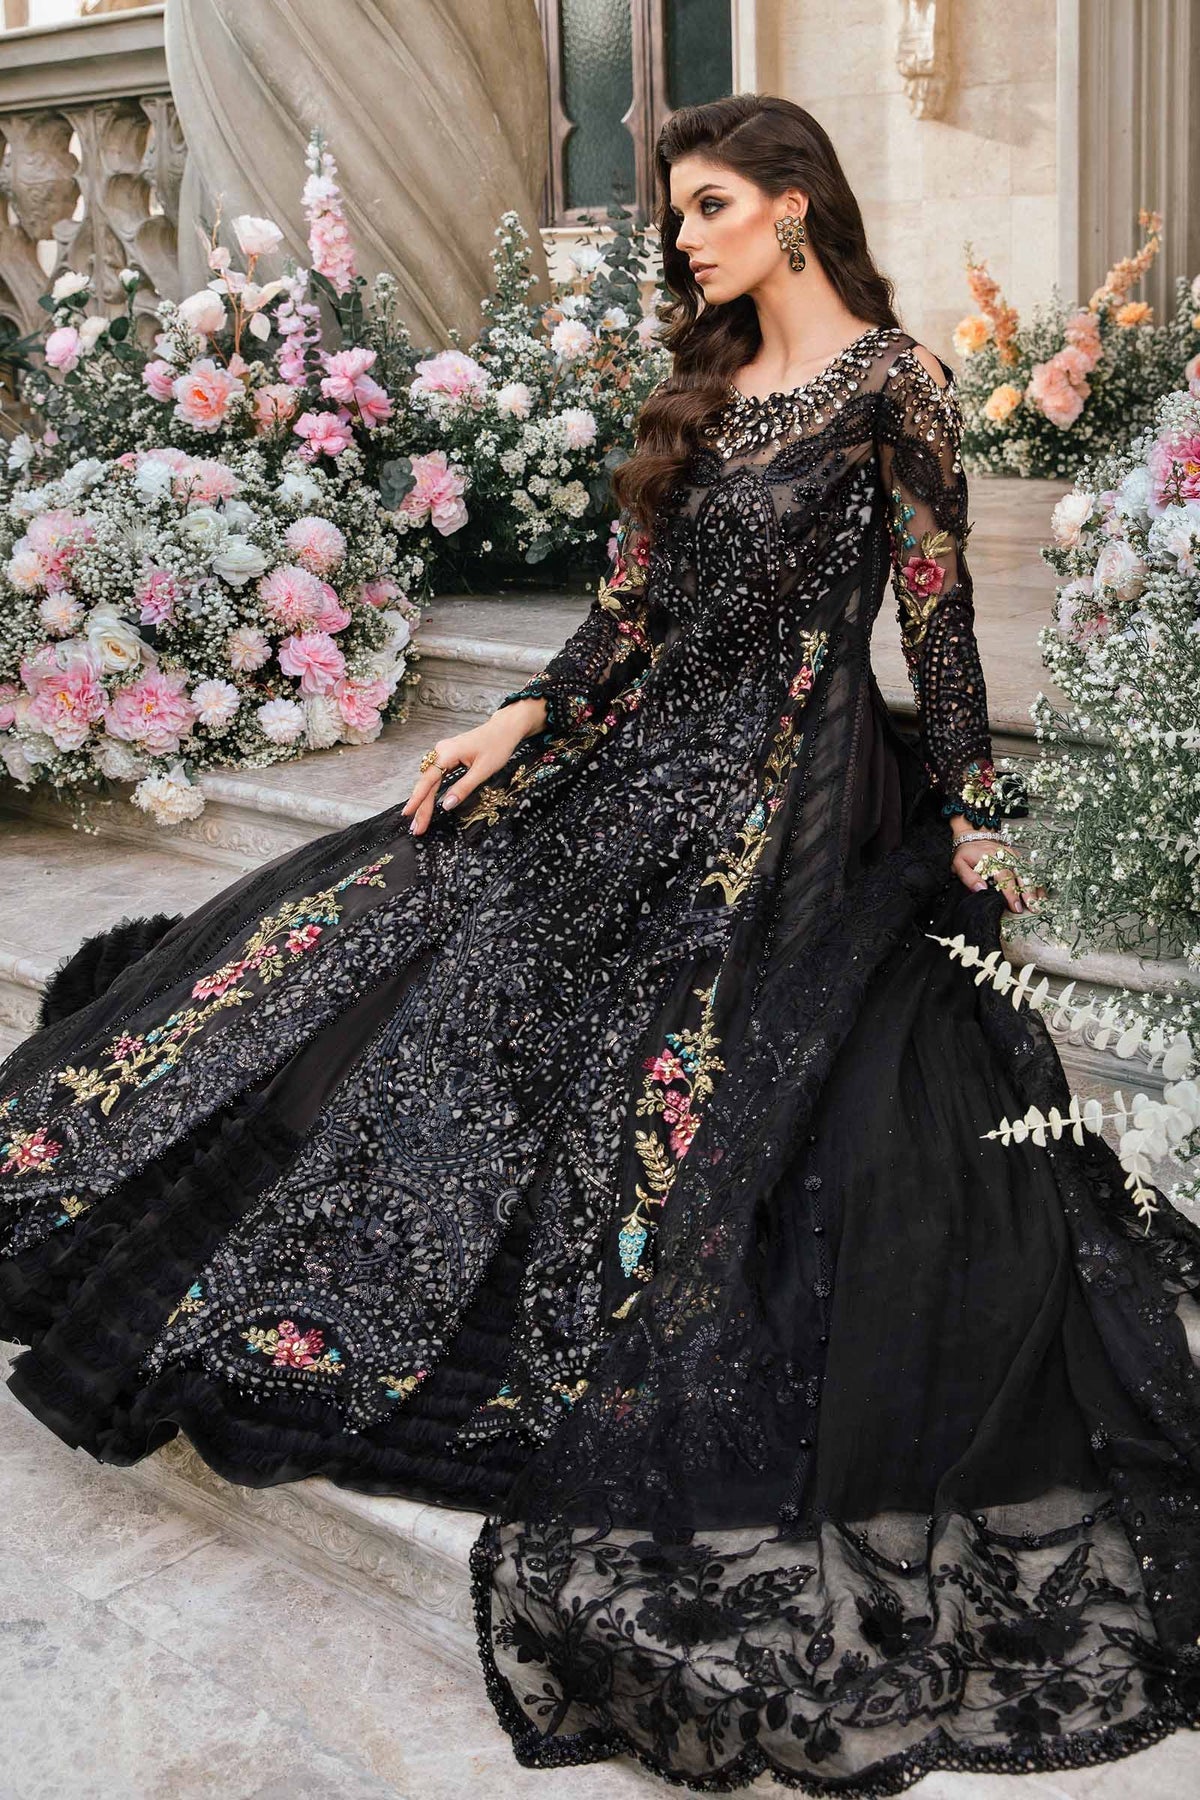 Maria B Mbroidered Eid Edit Collection 24 (02)